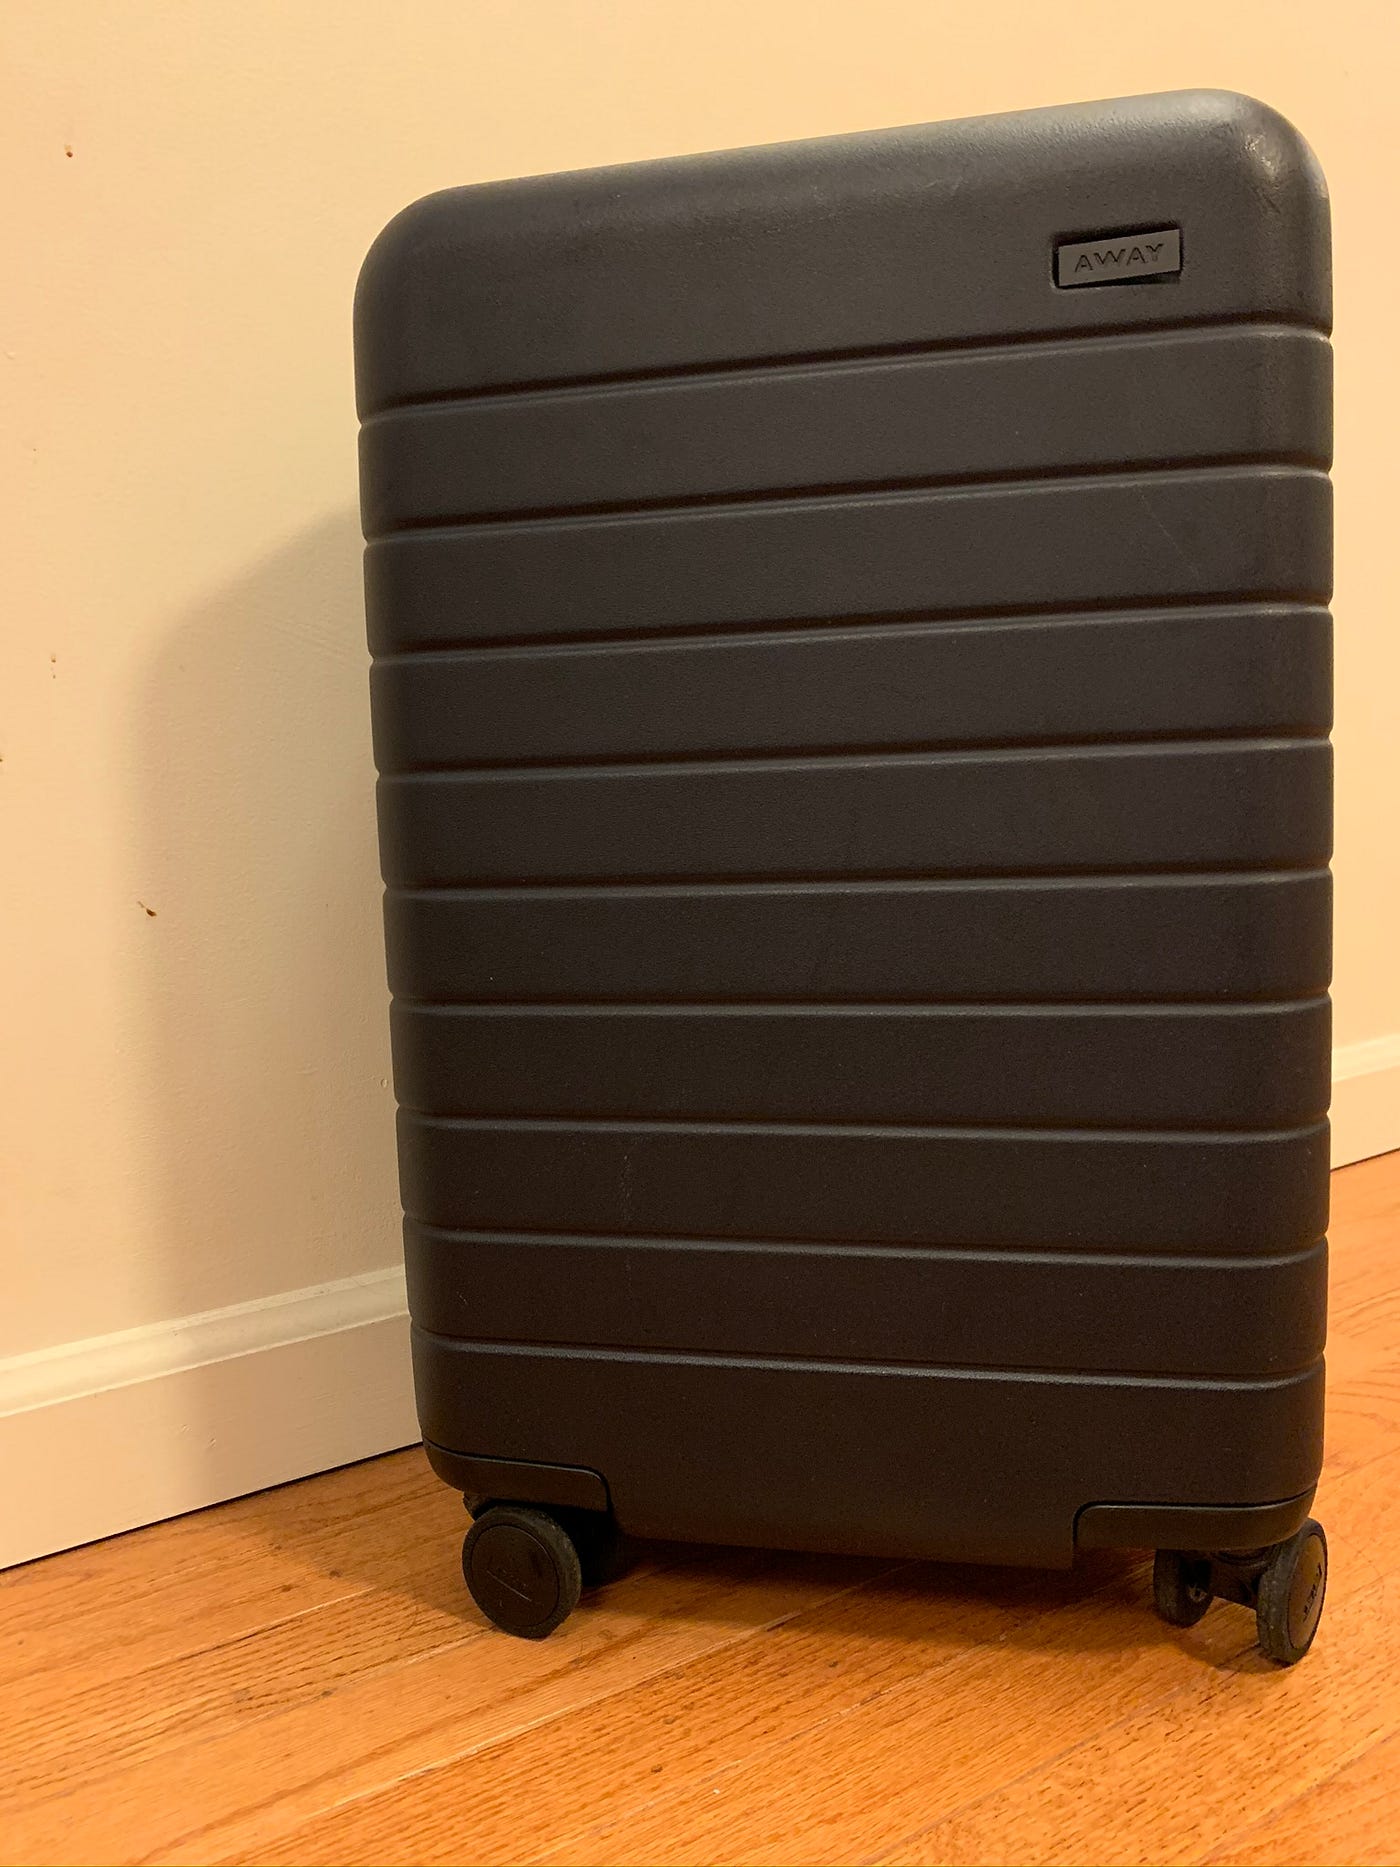 Ode to Paint Pens…or How I Transformed a Boring Away Suitcase (DIY FTW!), by LaTeisha Moore